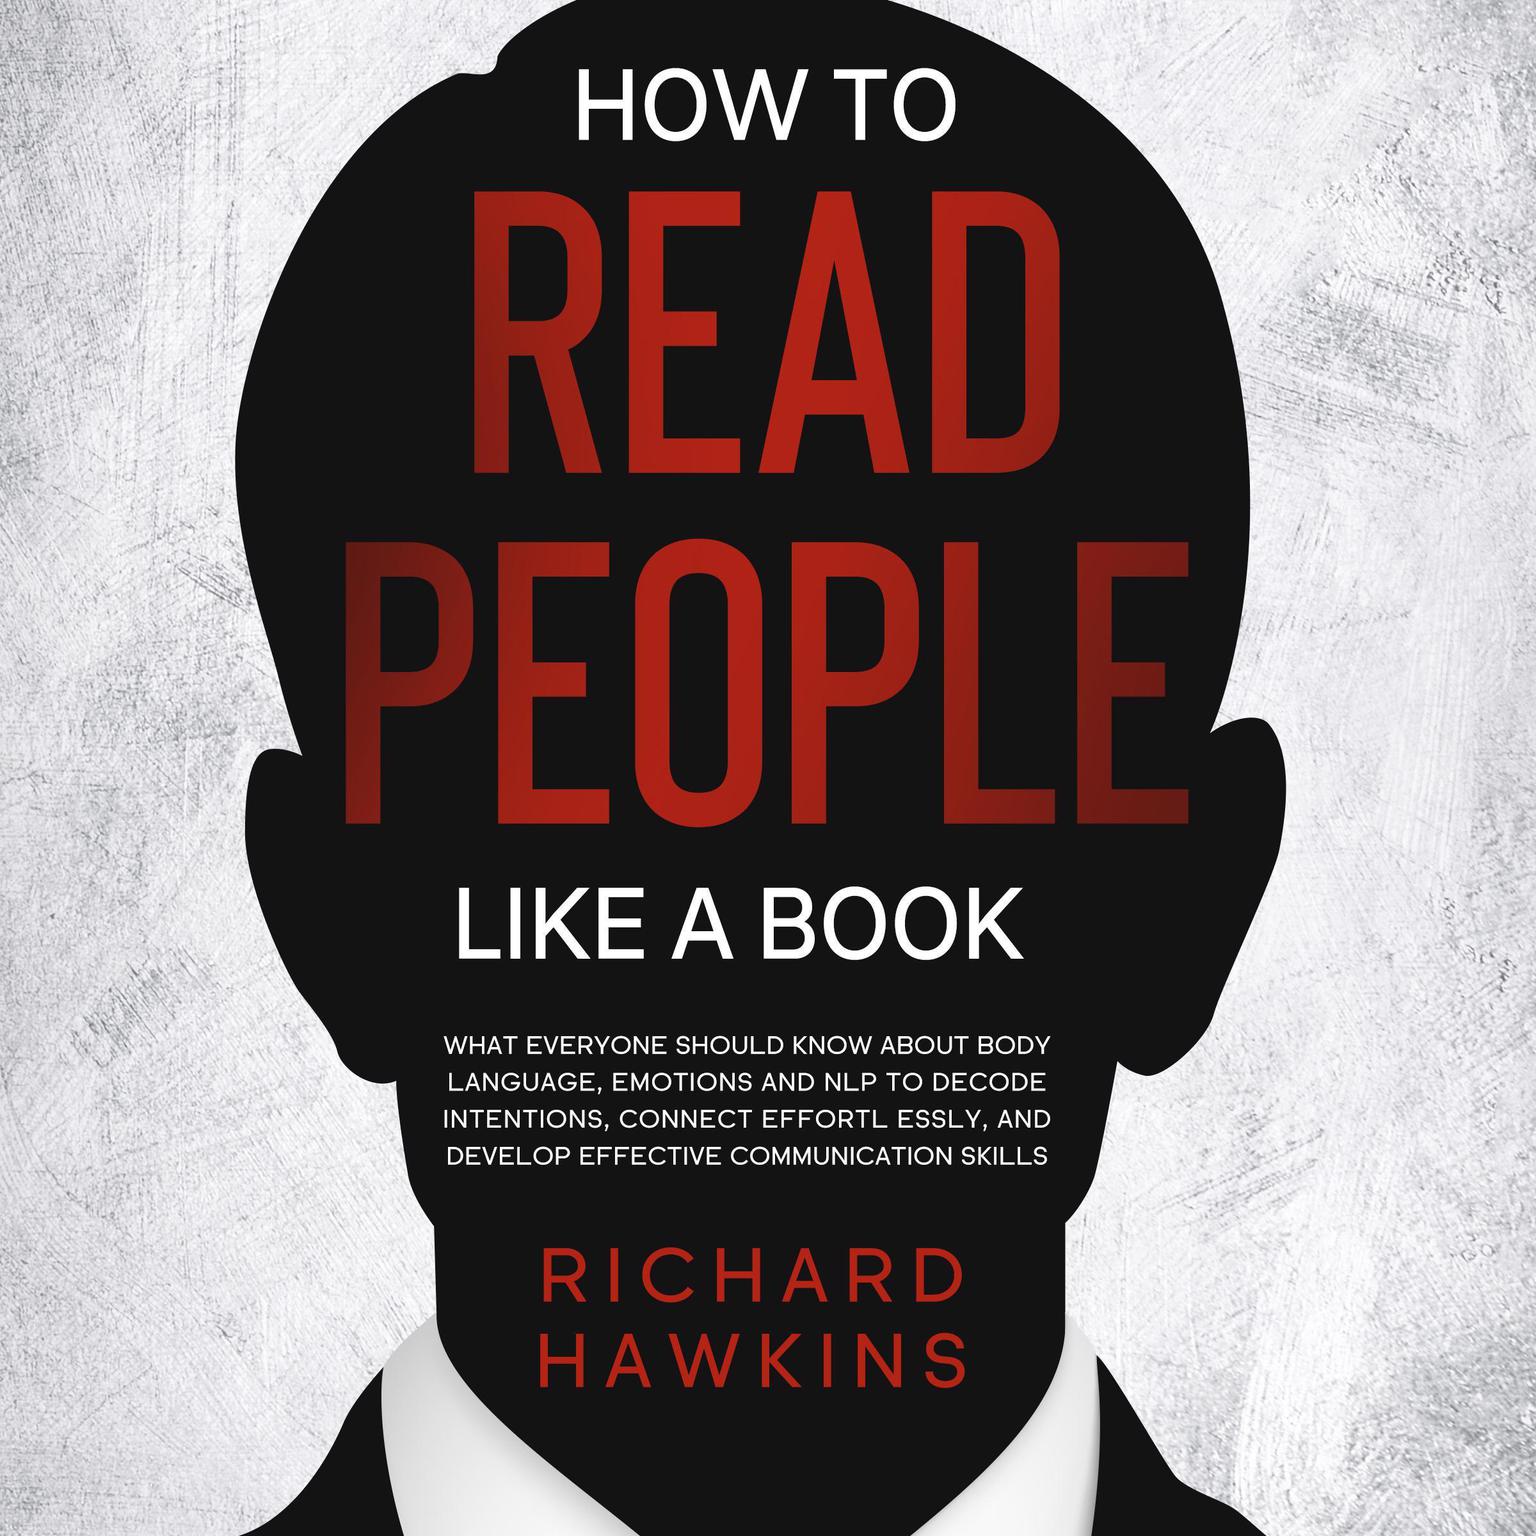 How to Read People Like a Book: What Everyone Should Know About Body Language, Emotions and NLP to Decode Intentions, Connect Effortlessly, and Develop Effective Communication Skills Audiobook, by Richard Hawkins